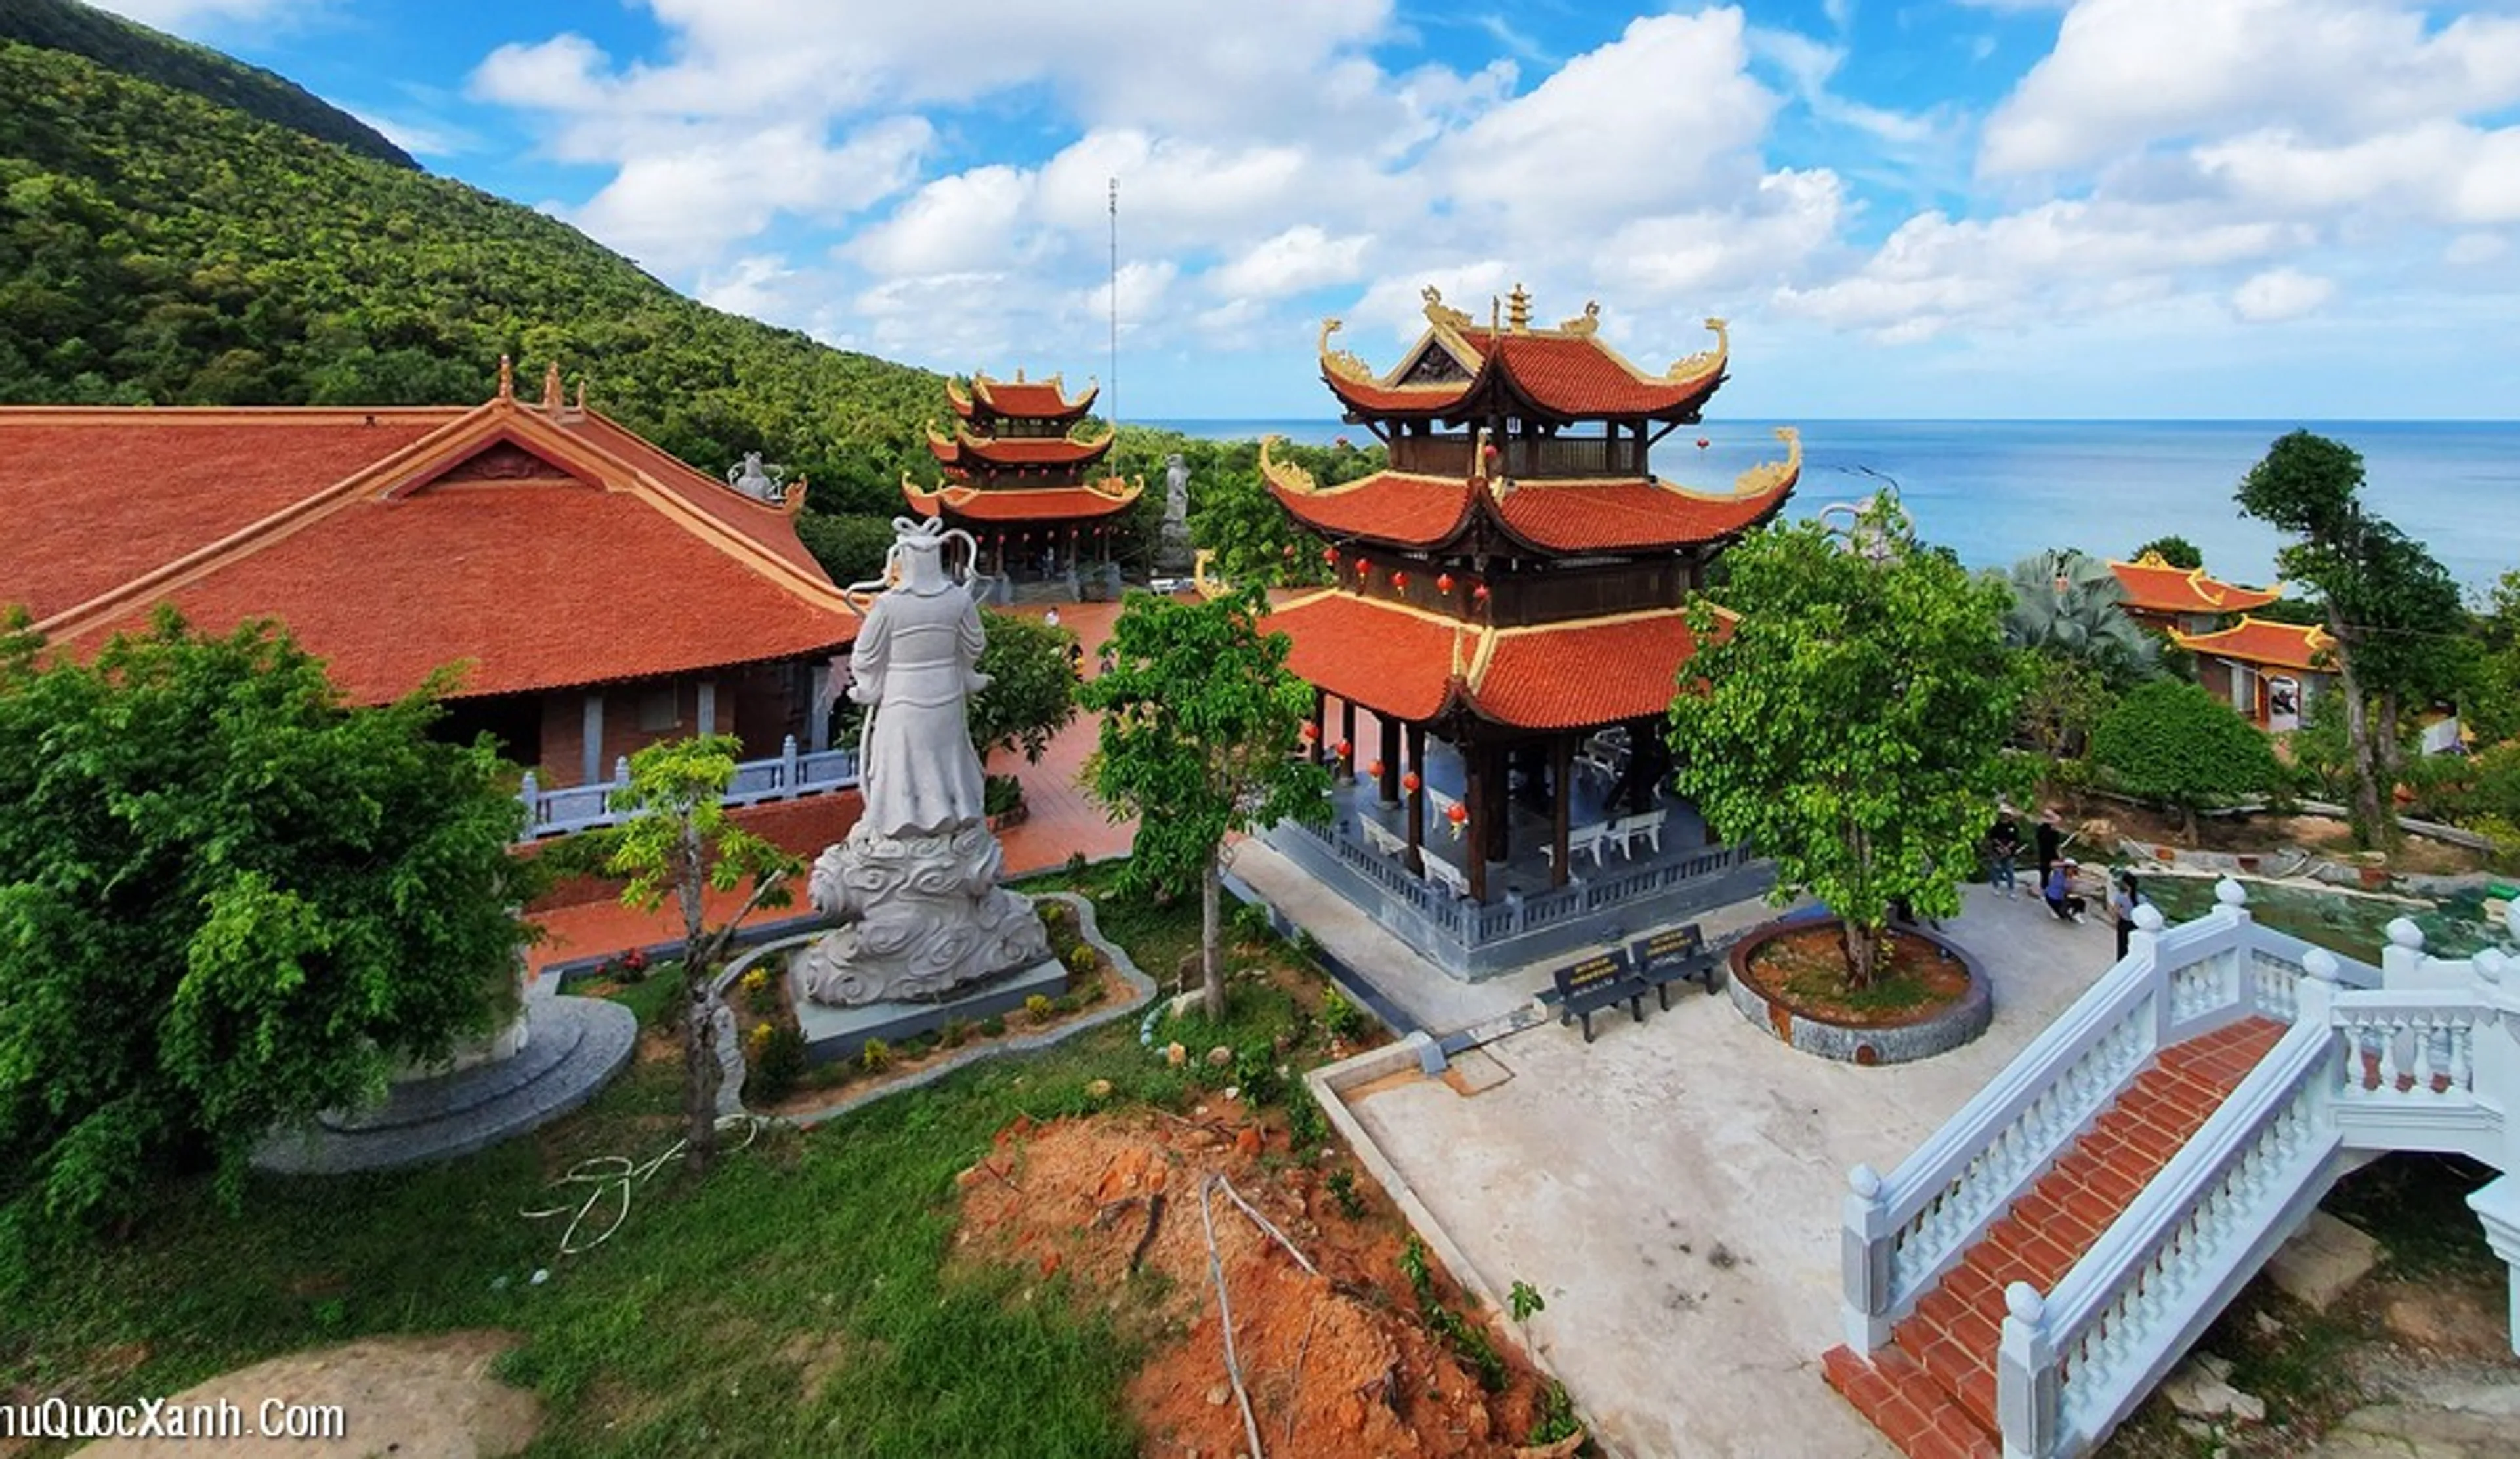 Explore the Protectorate Pagoda on Phu Quoc pearl island